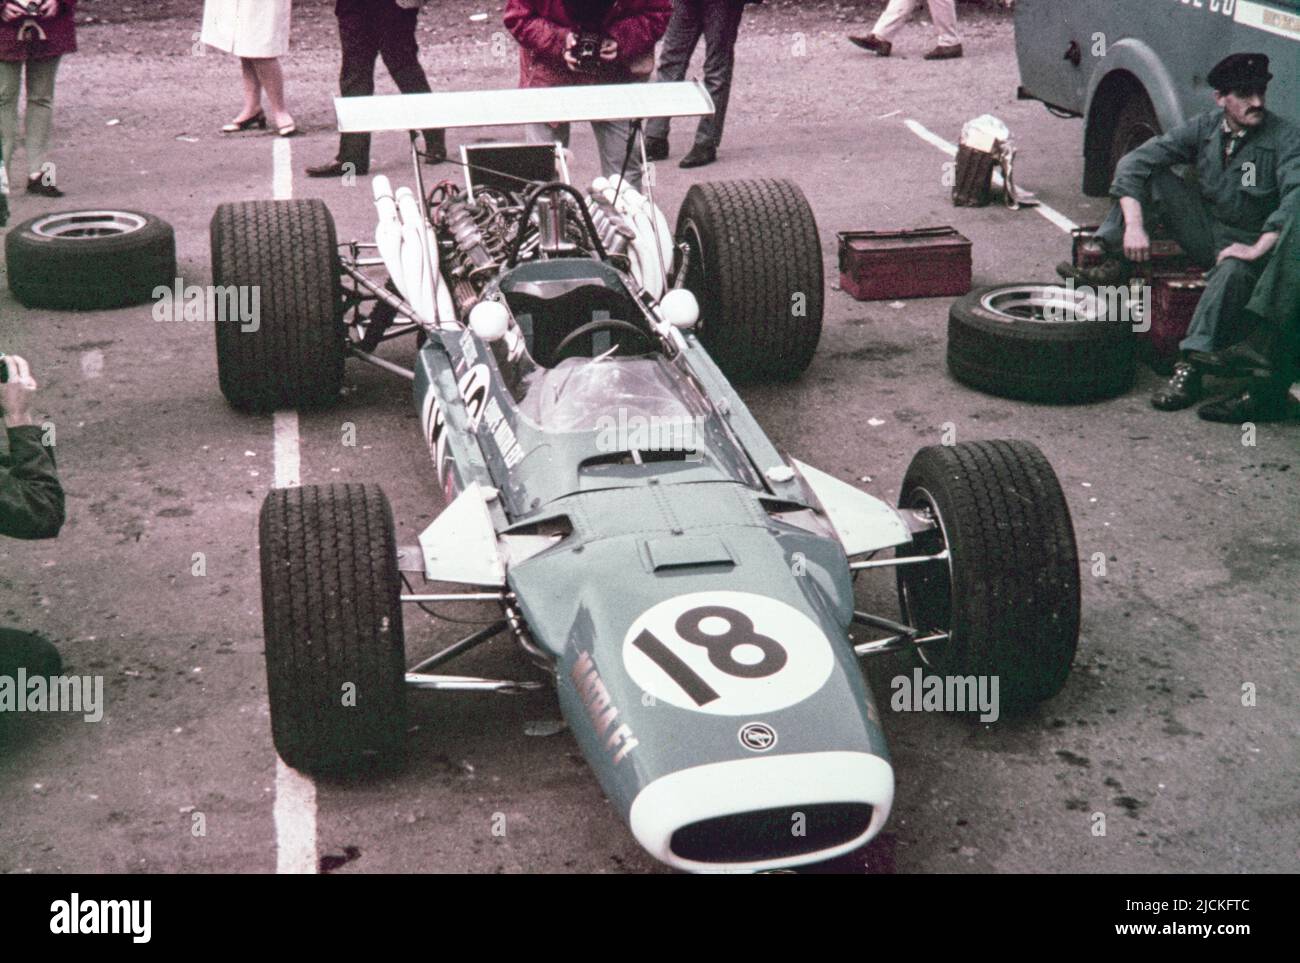 1968 British Formula 1 Grand Prix at Brands Hatch. The Matra Sports Matra MS11, race number 18, driven by Jean-Pierre Beltiose. Stock Photo